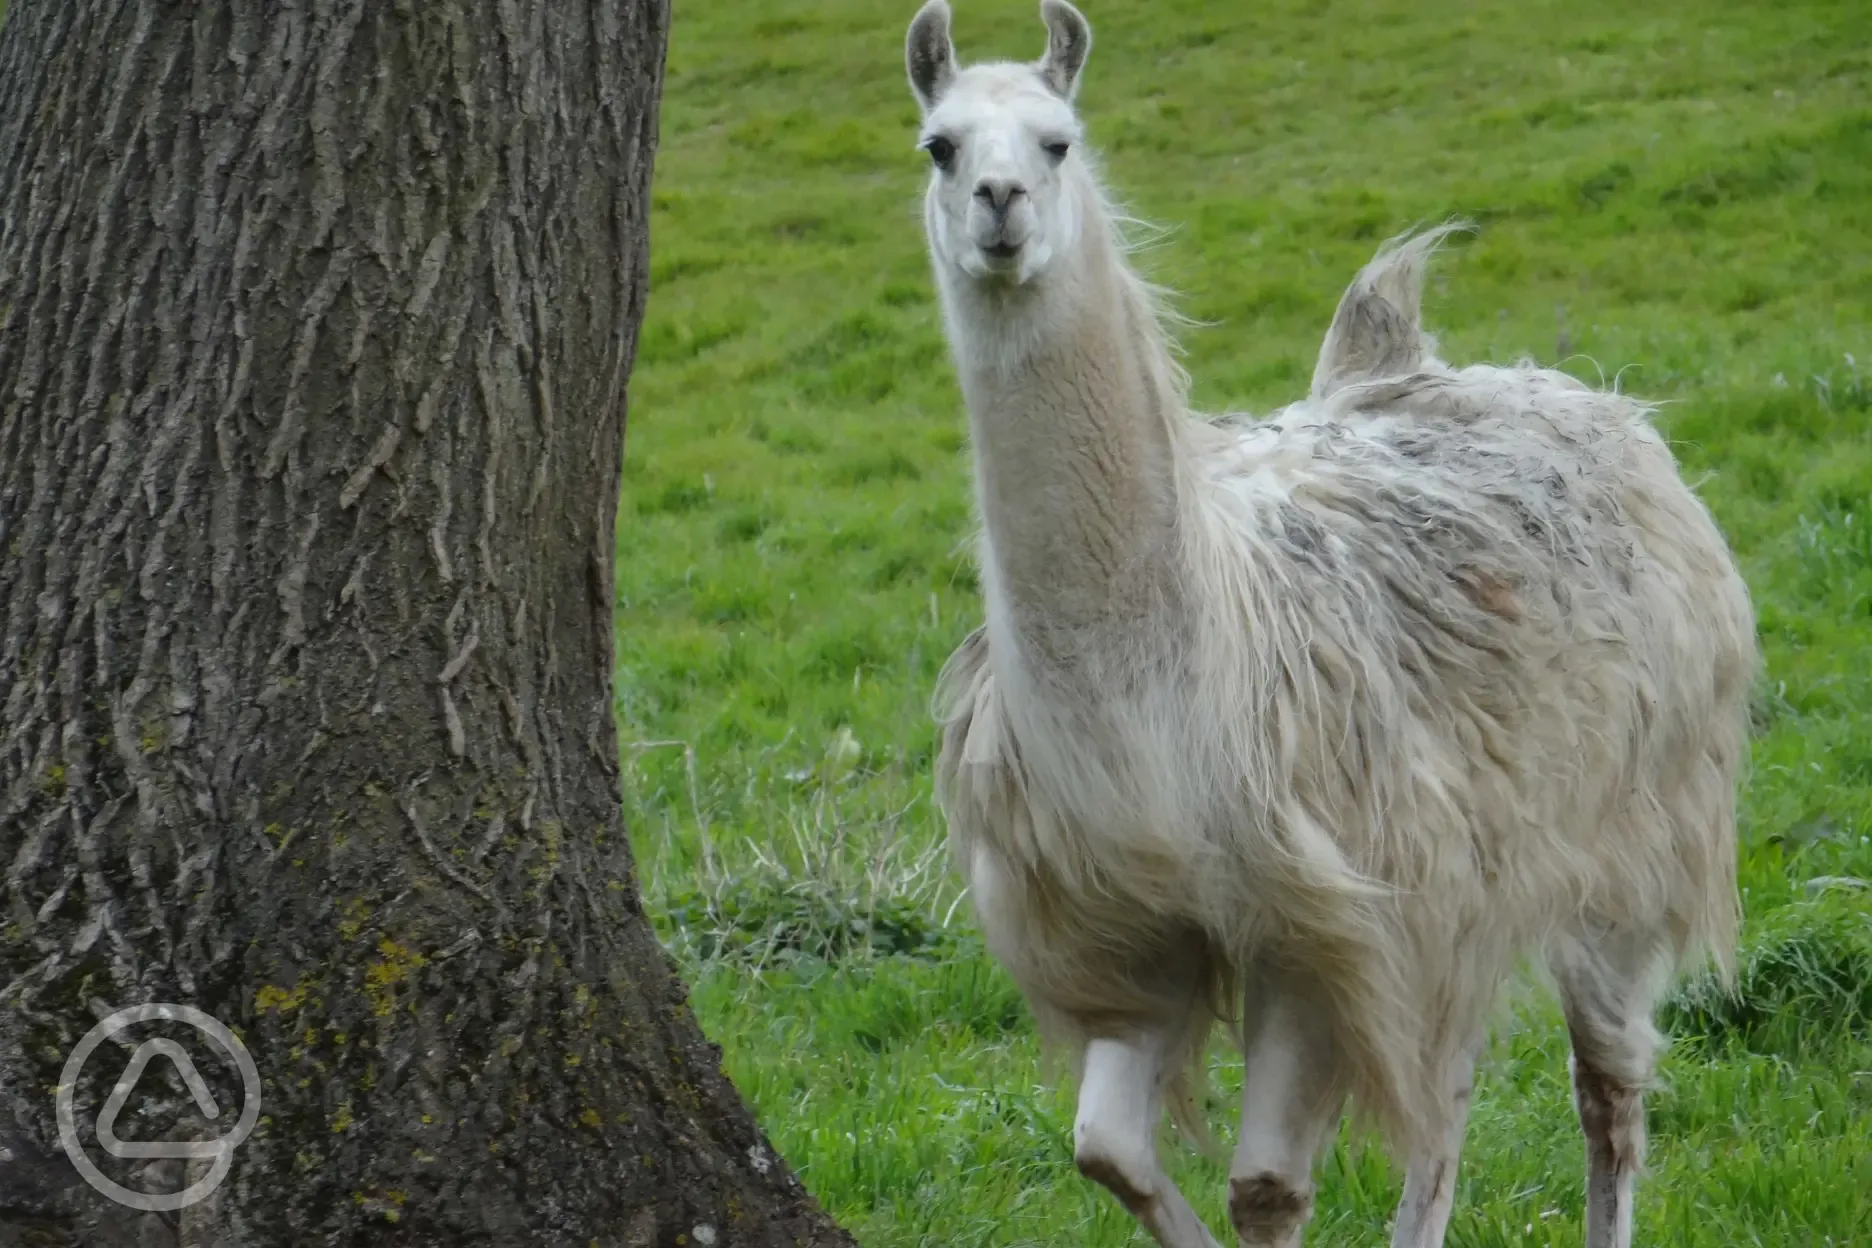 One of our Llamas